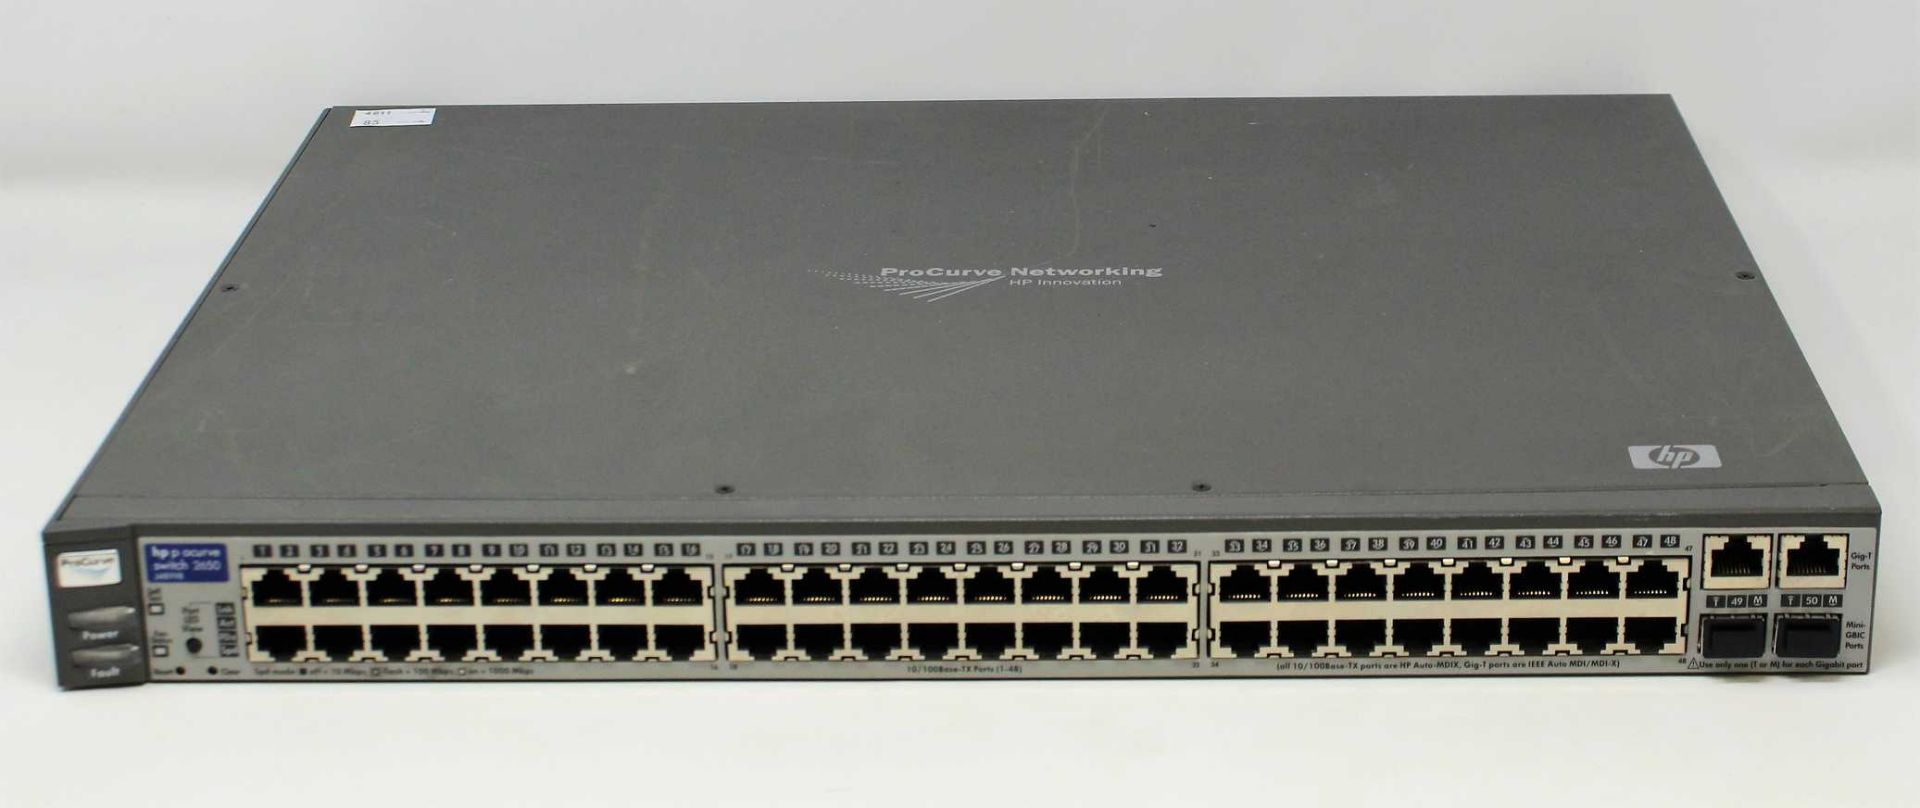 Four pre-owned HP ProCurve Switch 2650 J4899B 48 Port Switches (Untested, sold as seen).